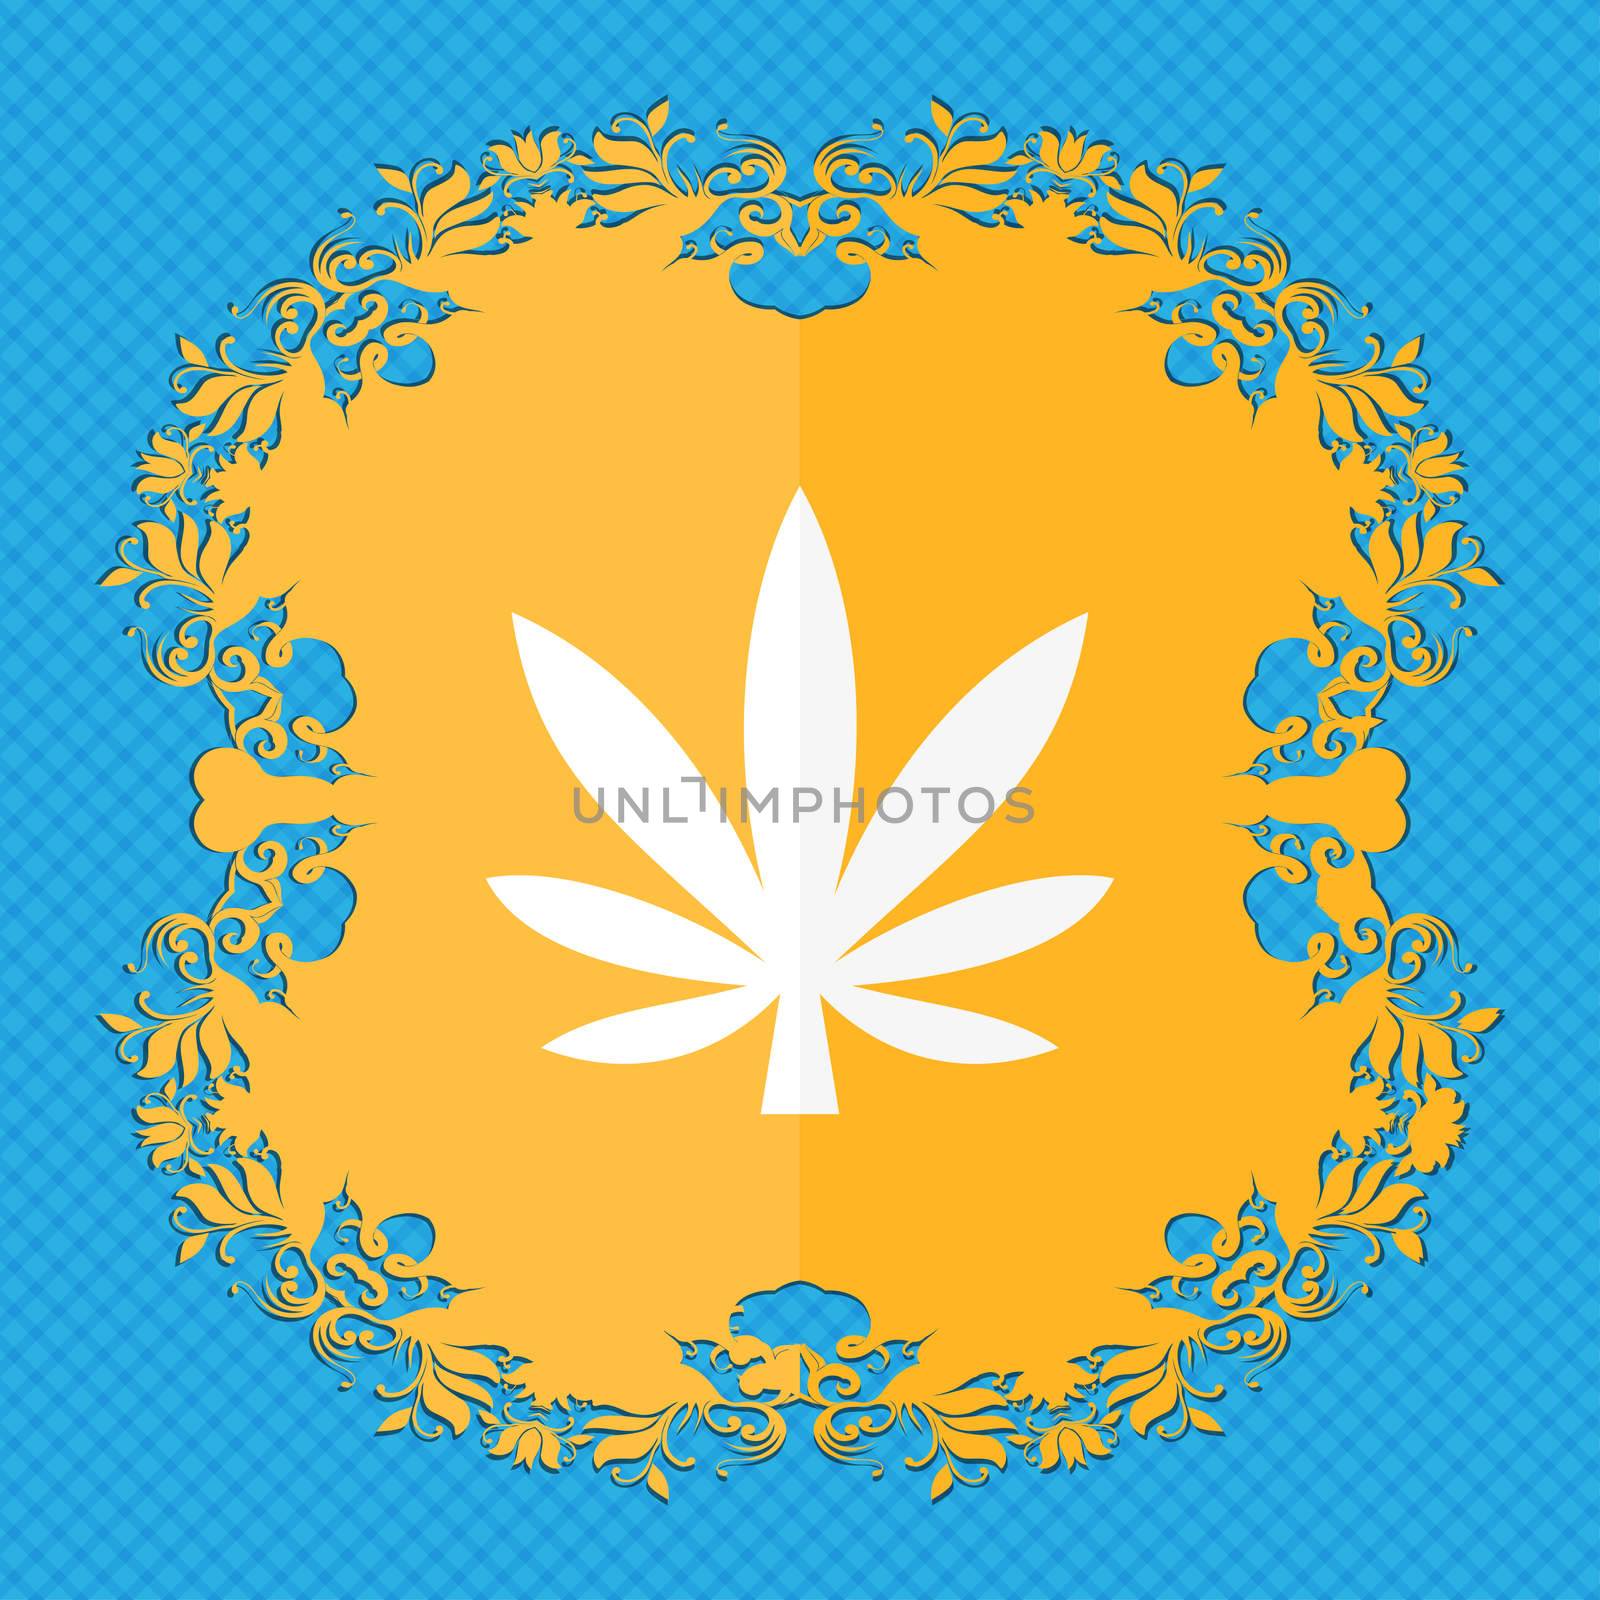 Cannabis leaf . Floral flat design on a blue abstract background with place for your text. illustration